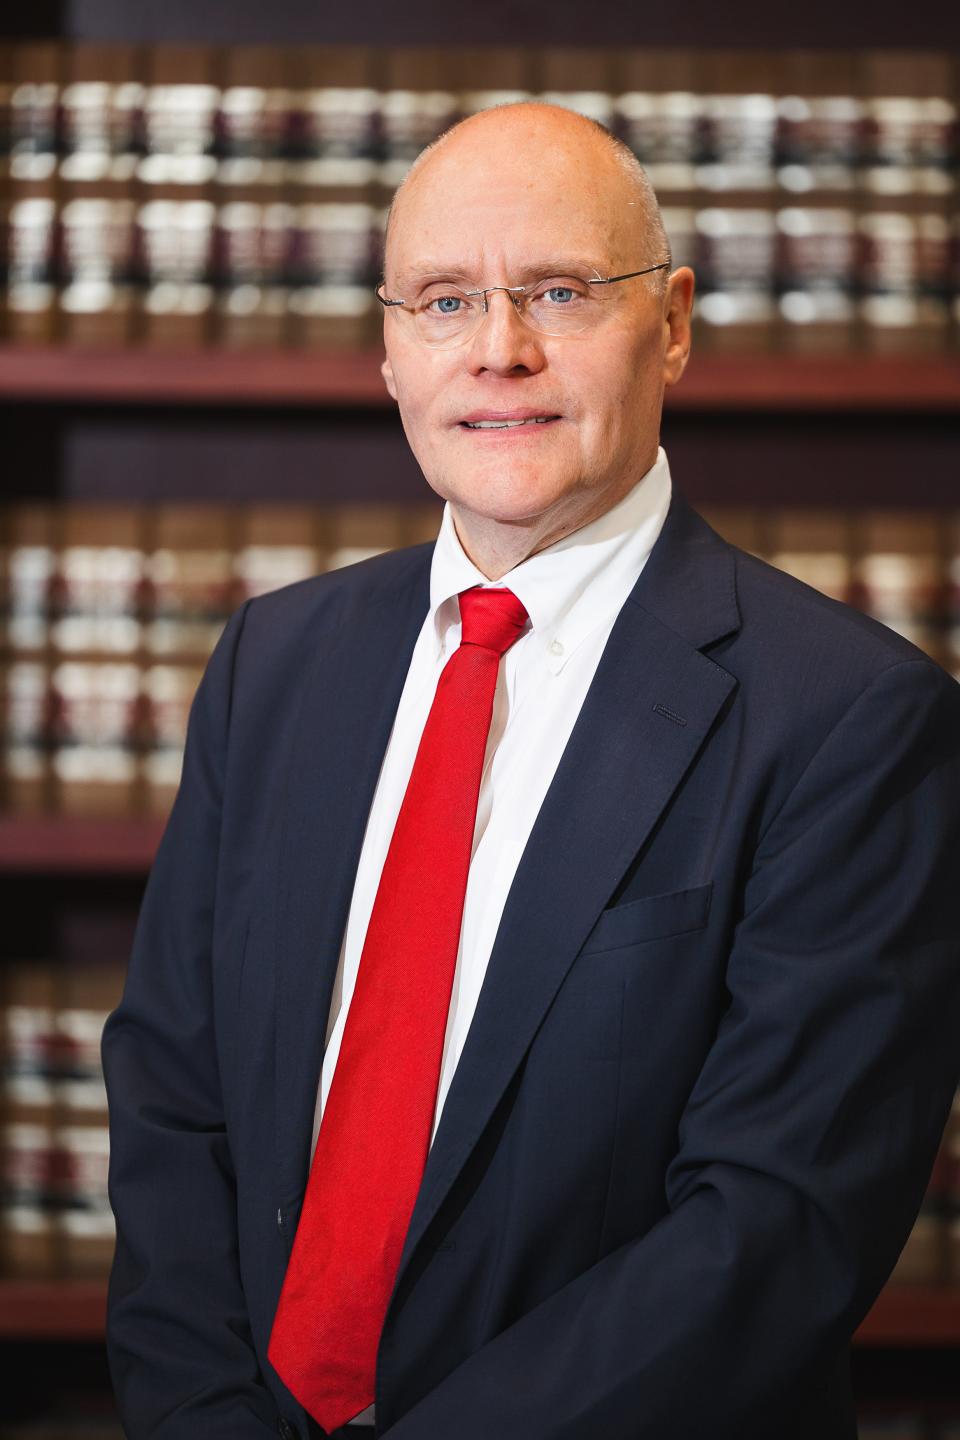 Daniel Shue is seeking re-election in the prosecuting attorney's office.